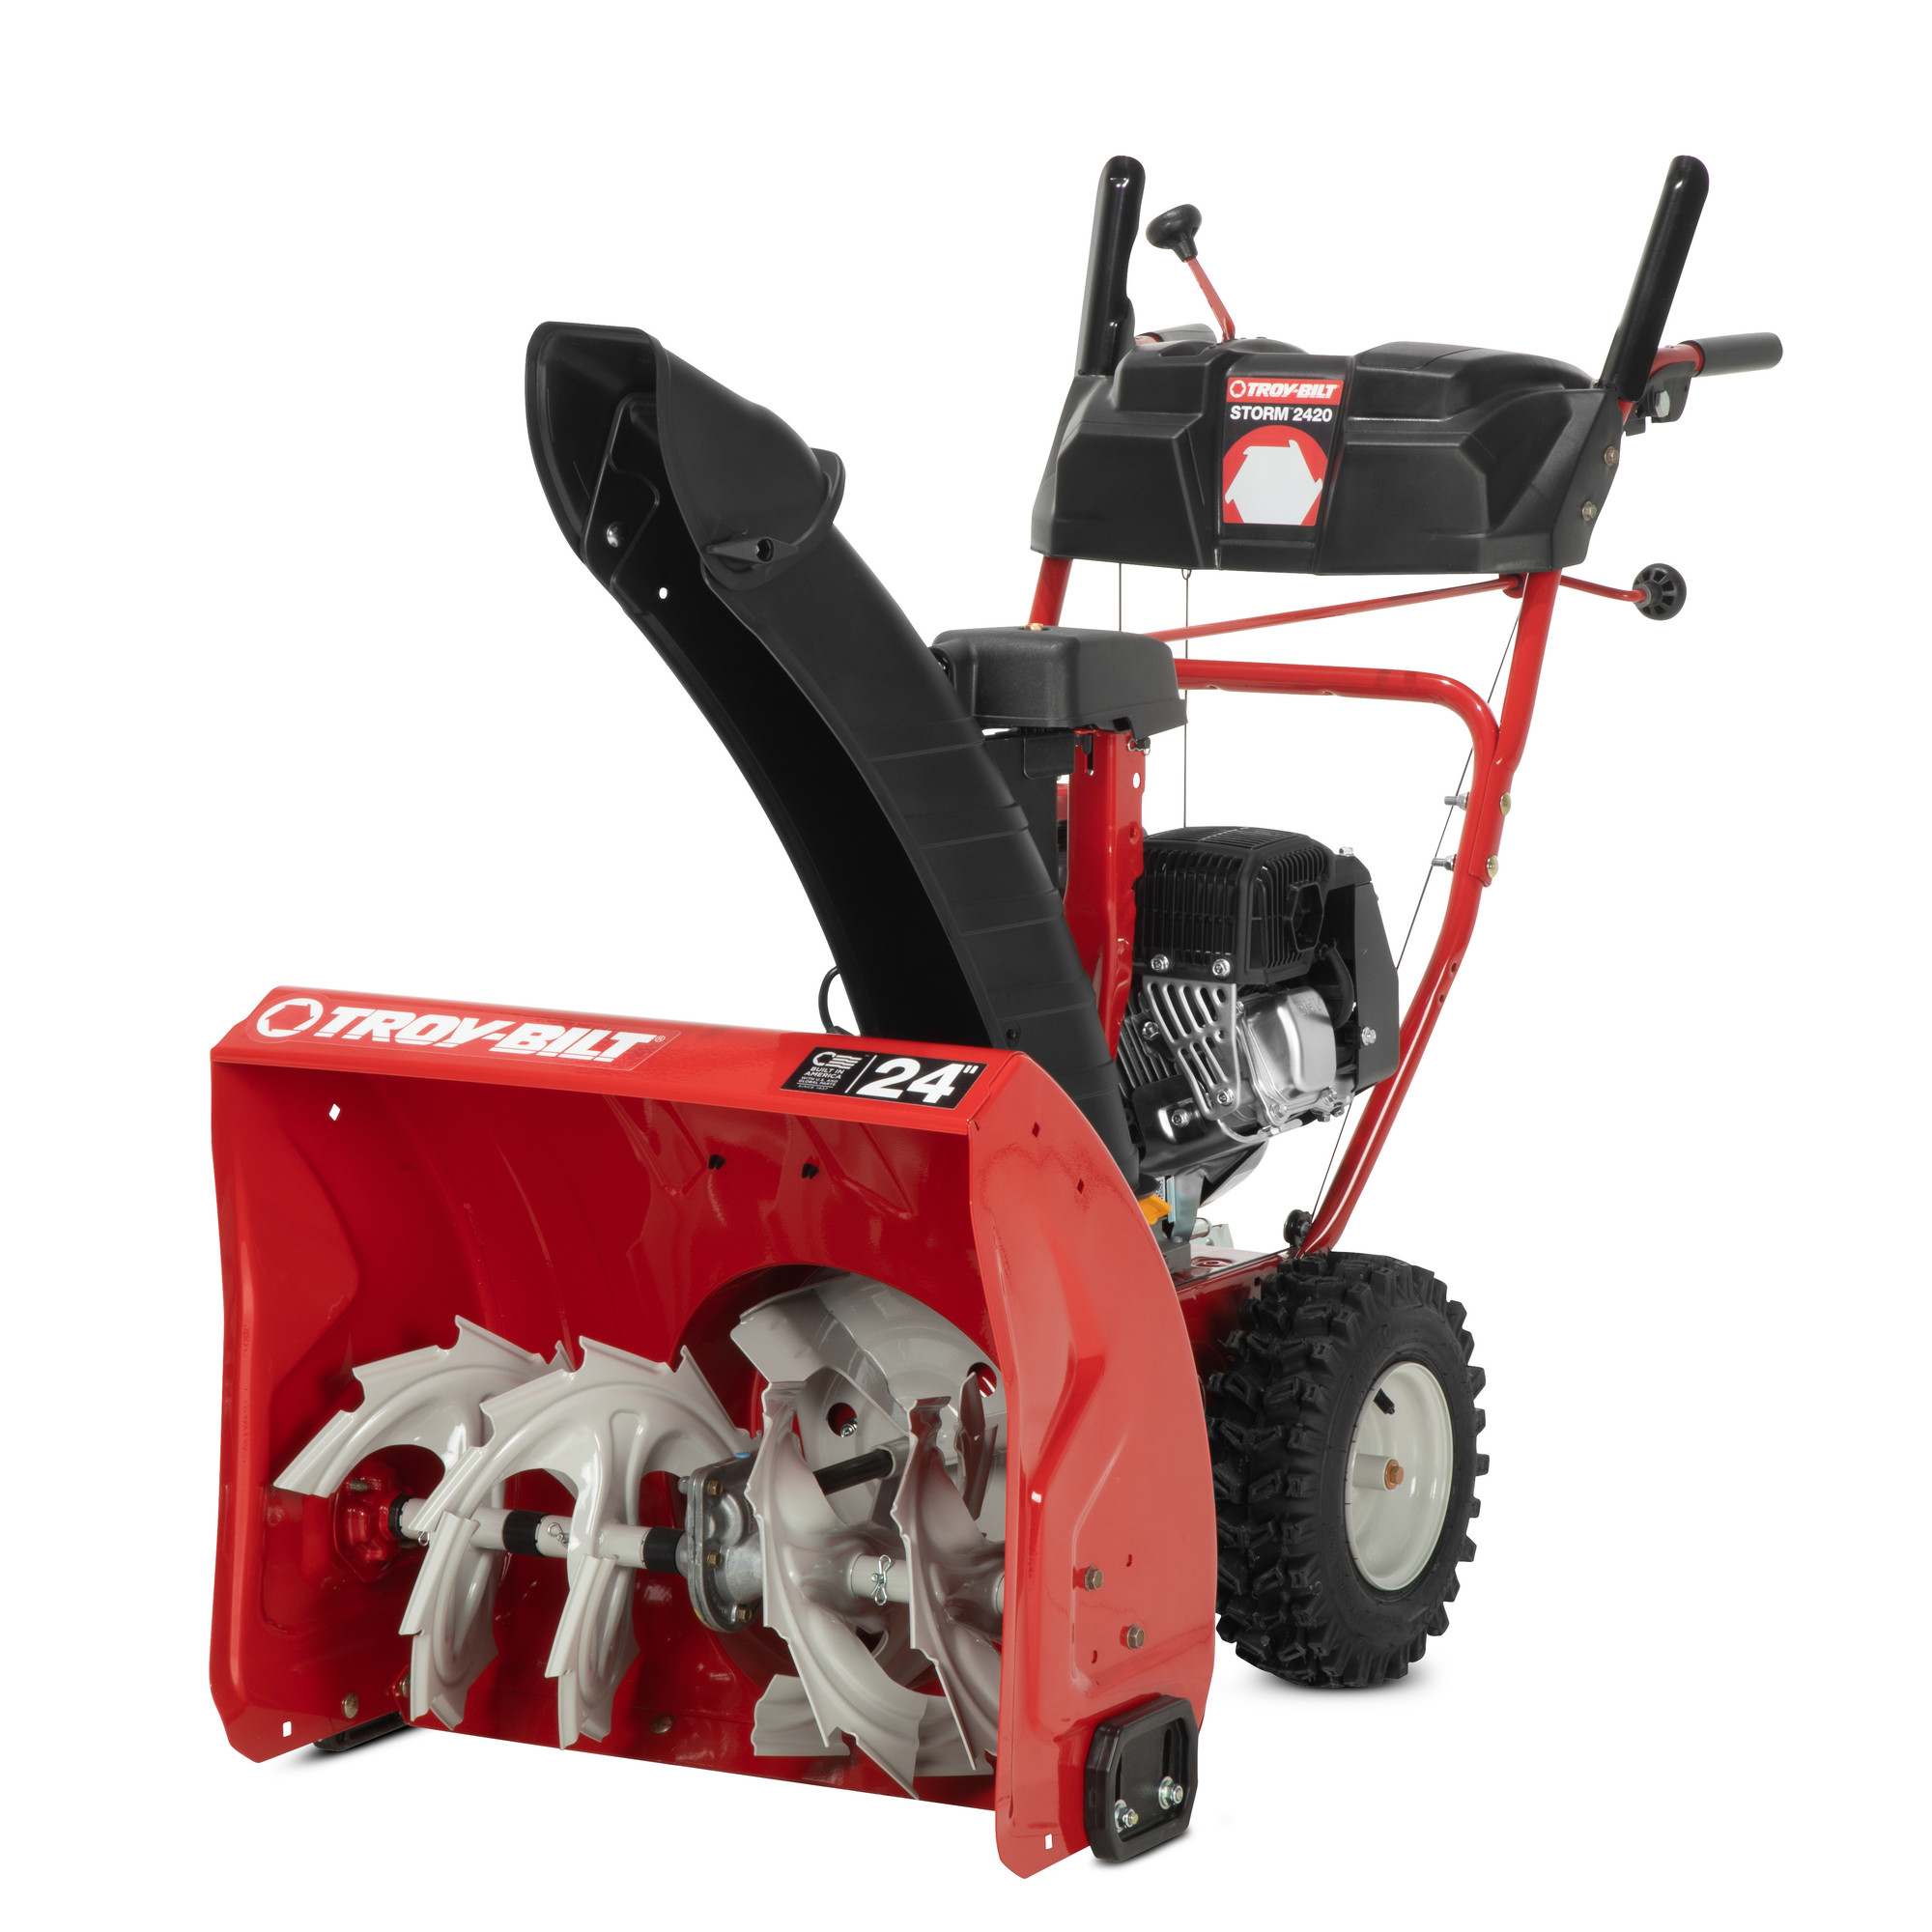 Troy-Bilt, Storm 2420 24Inch 208cc Gas 2-Stage Snow Blower, Clearing Width 24 in, Engine Displacement 208 cc, Model 31CS6KN2B66